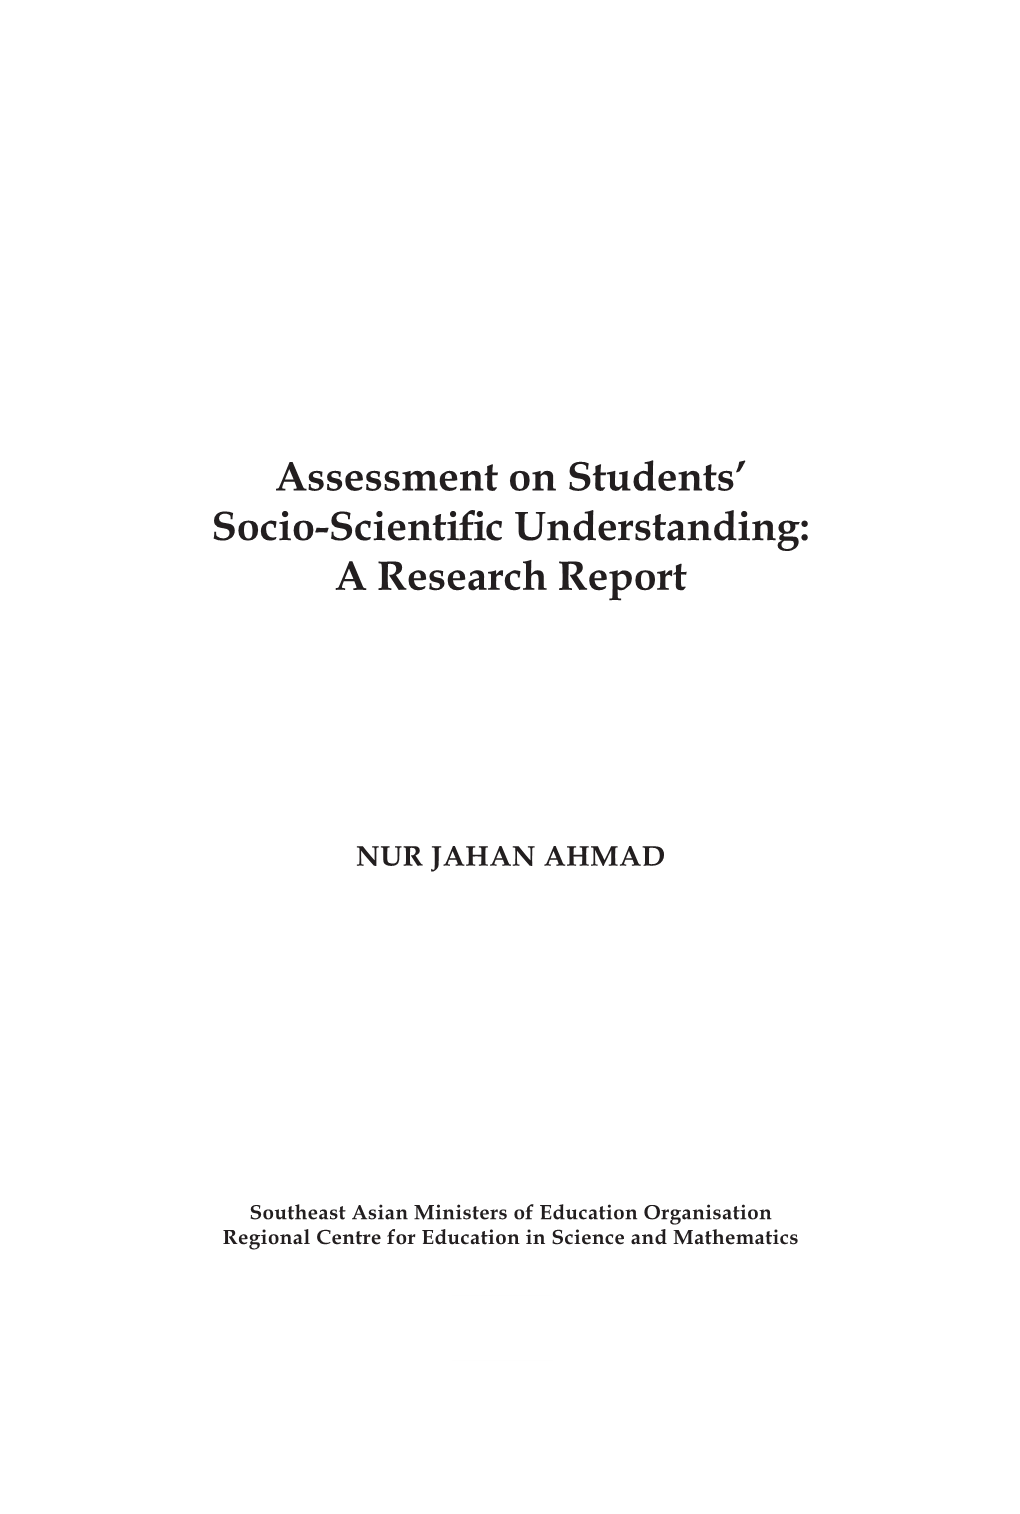 Assessment on Students' Socio-Scientific Understanding: a Research Report